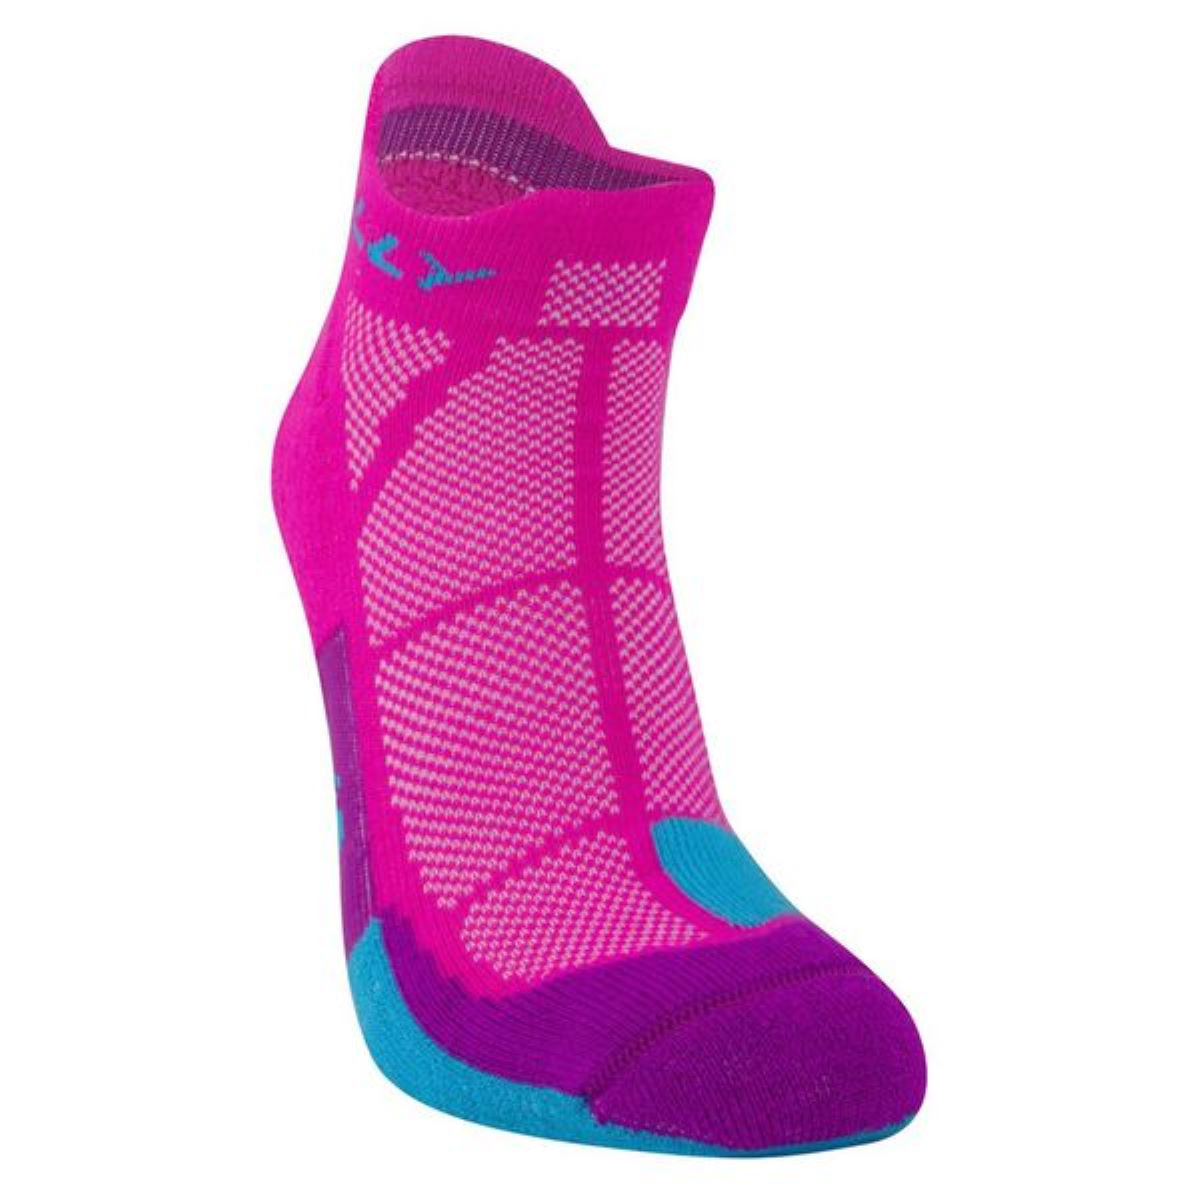 Calcetines Hilly Cushion para mujer (caña baja) - Calcetines